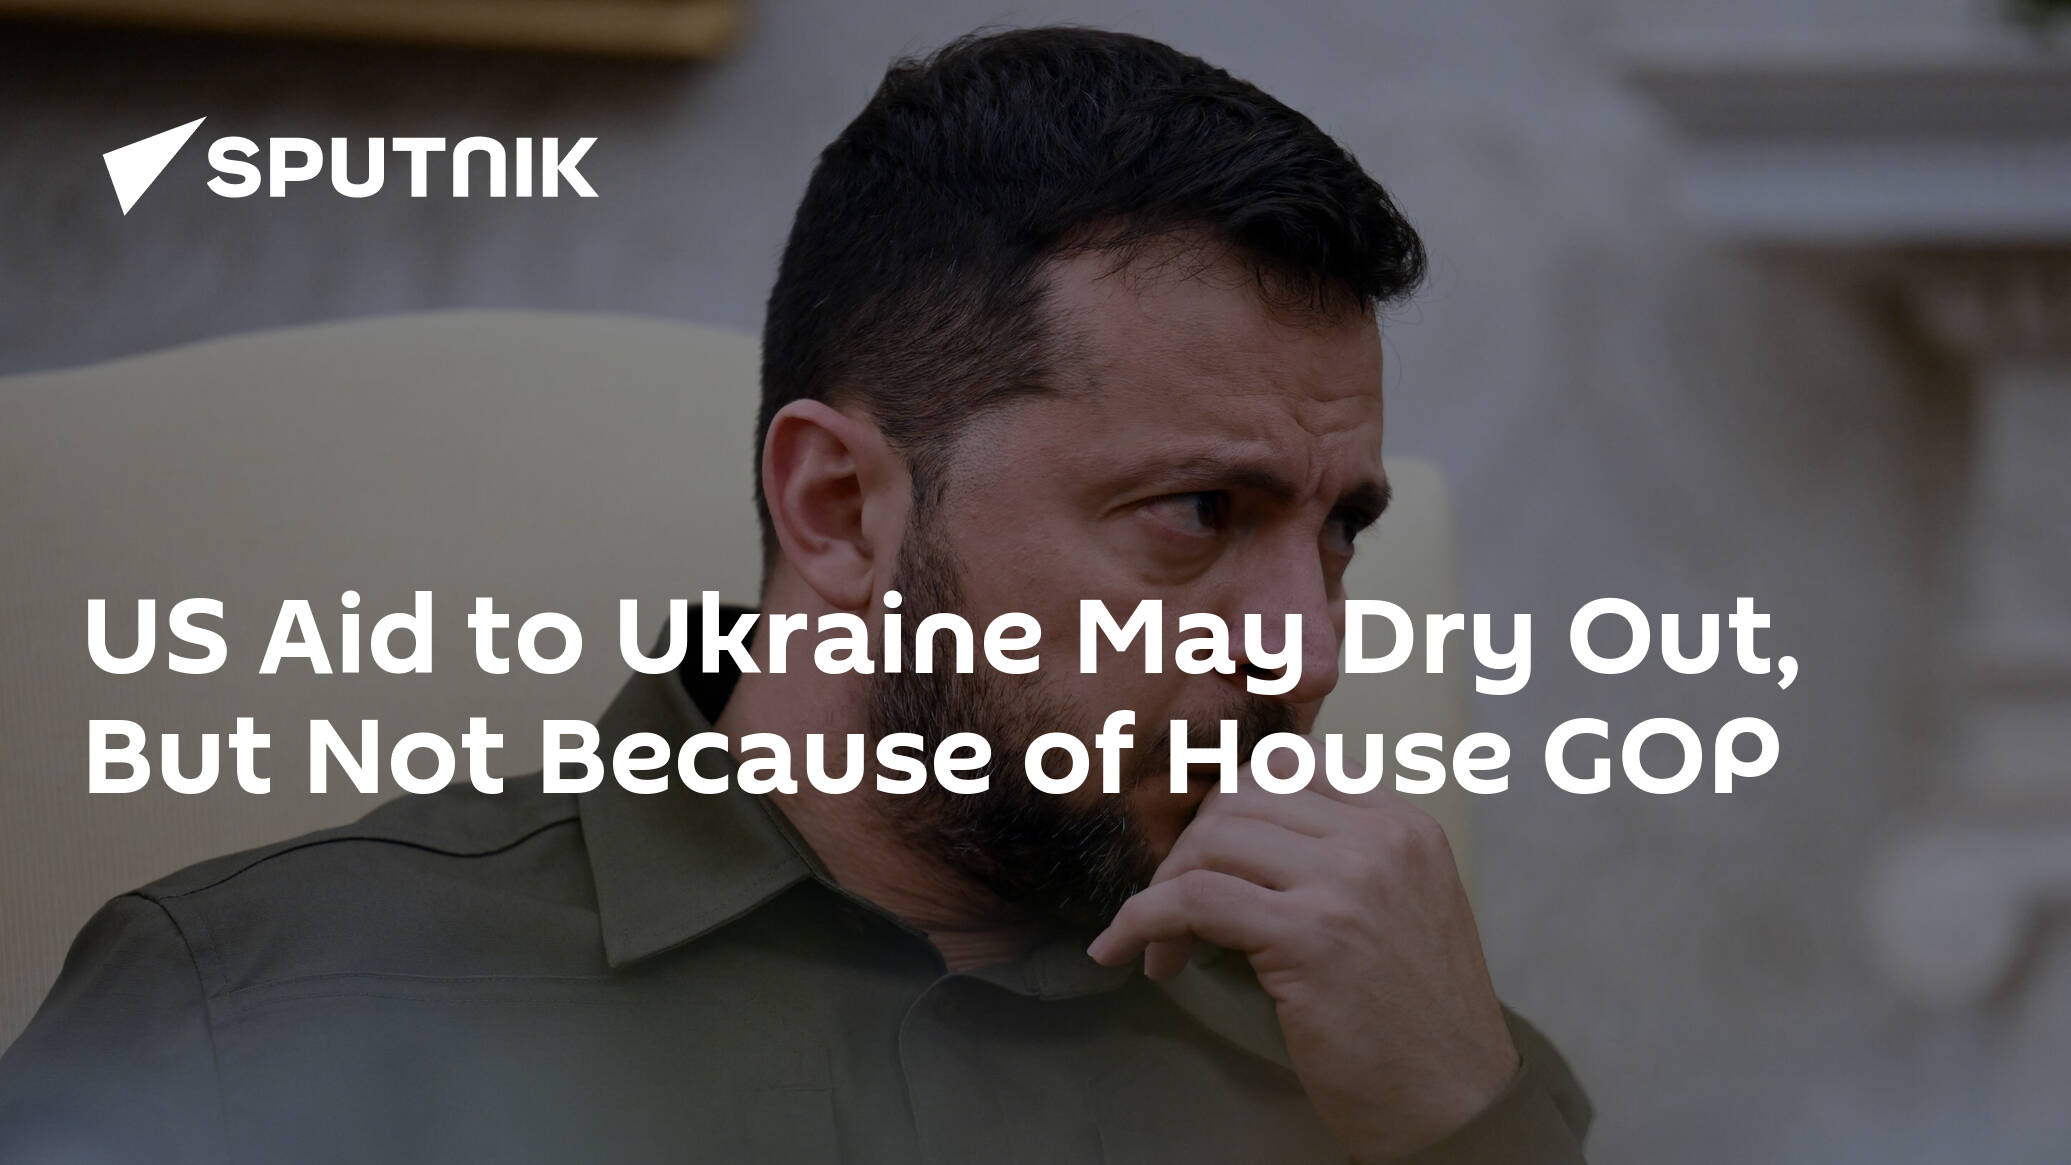 US Aid to Ukraine May Dry Out, But Not Because of House GOP